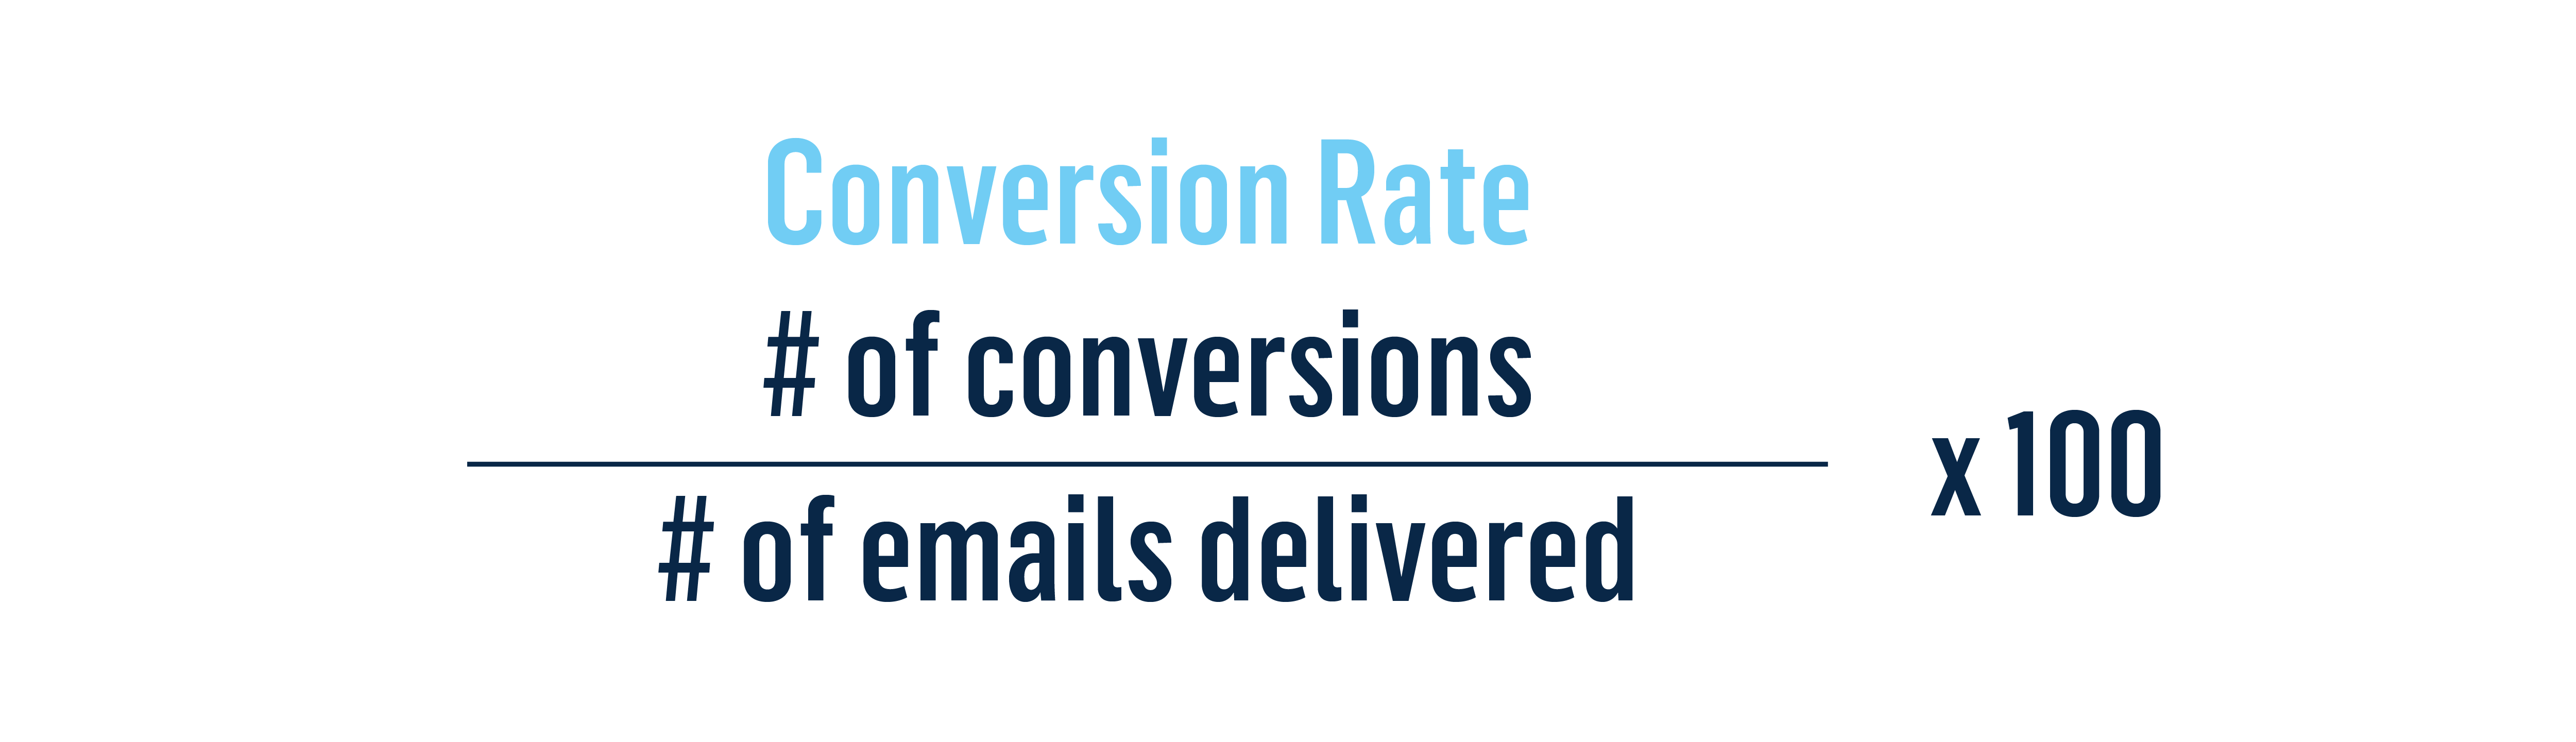 Conversion Rate: # of conversions / # of emails delivered x 100